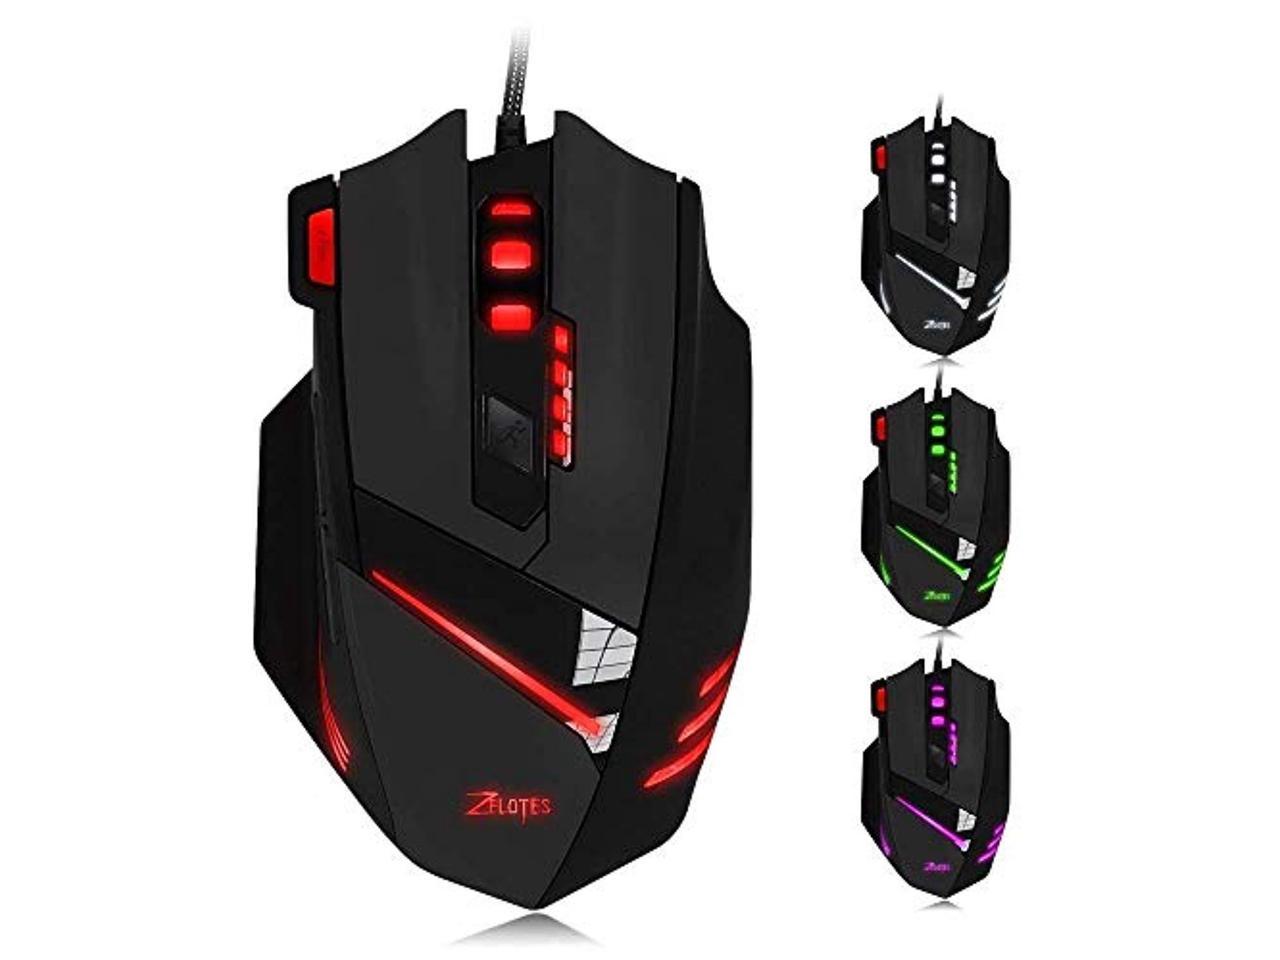 zelotes t60 gaming mouse manual